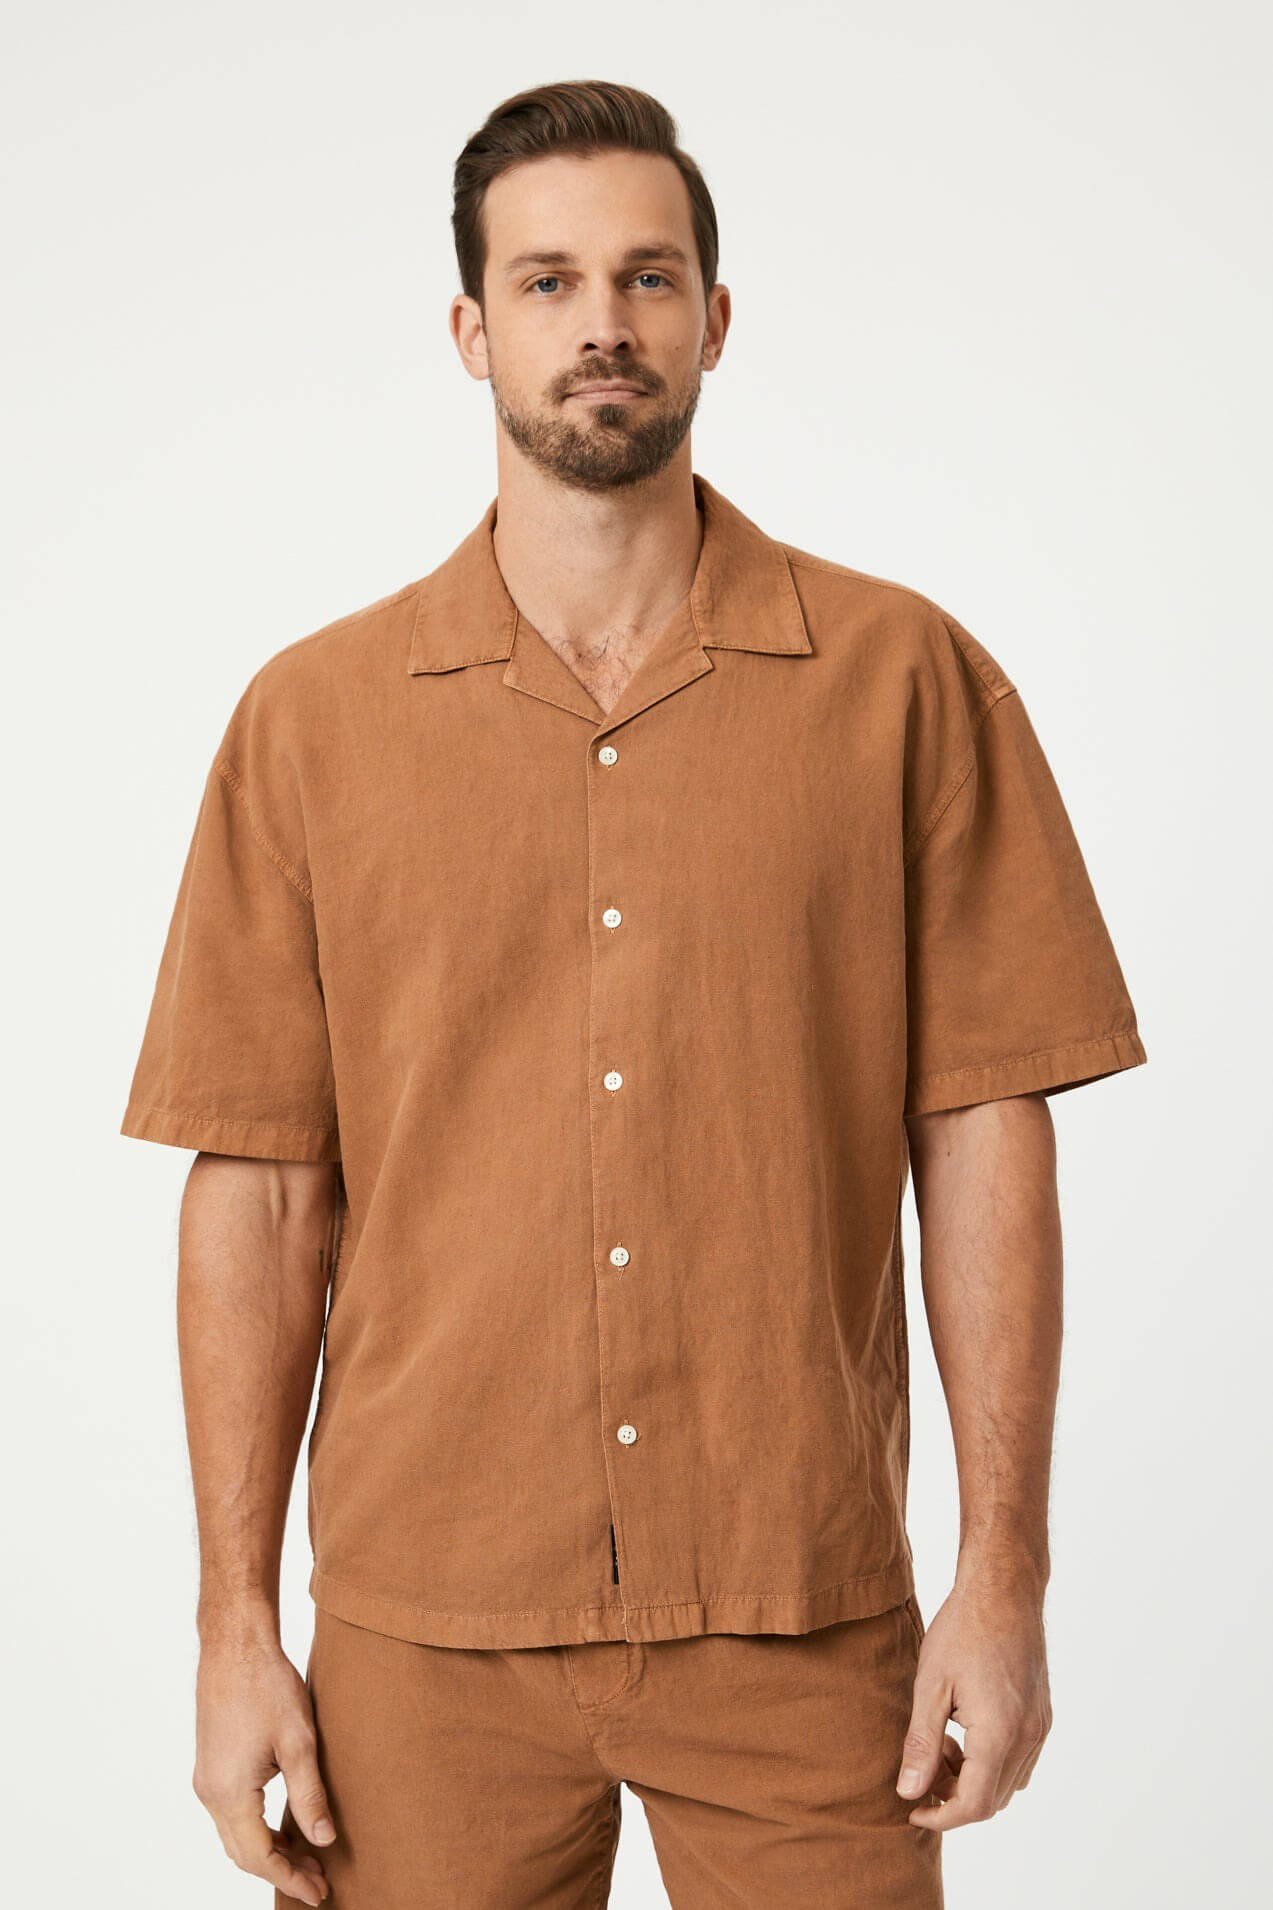 Mavi short sleeve button up shirt in toasted coconut